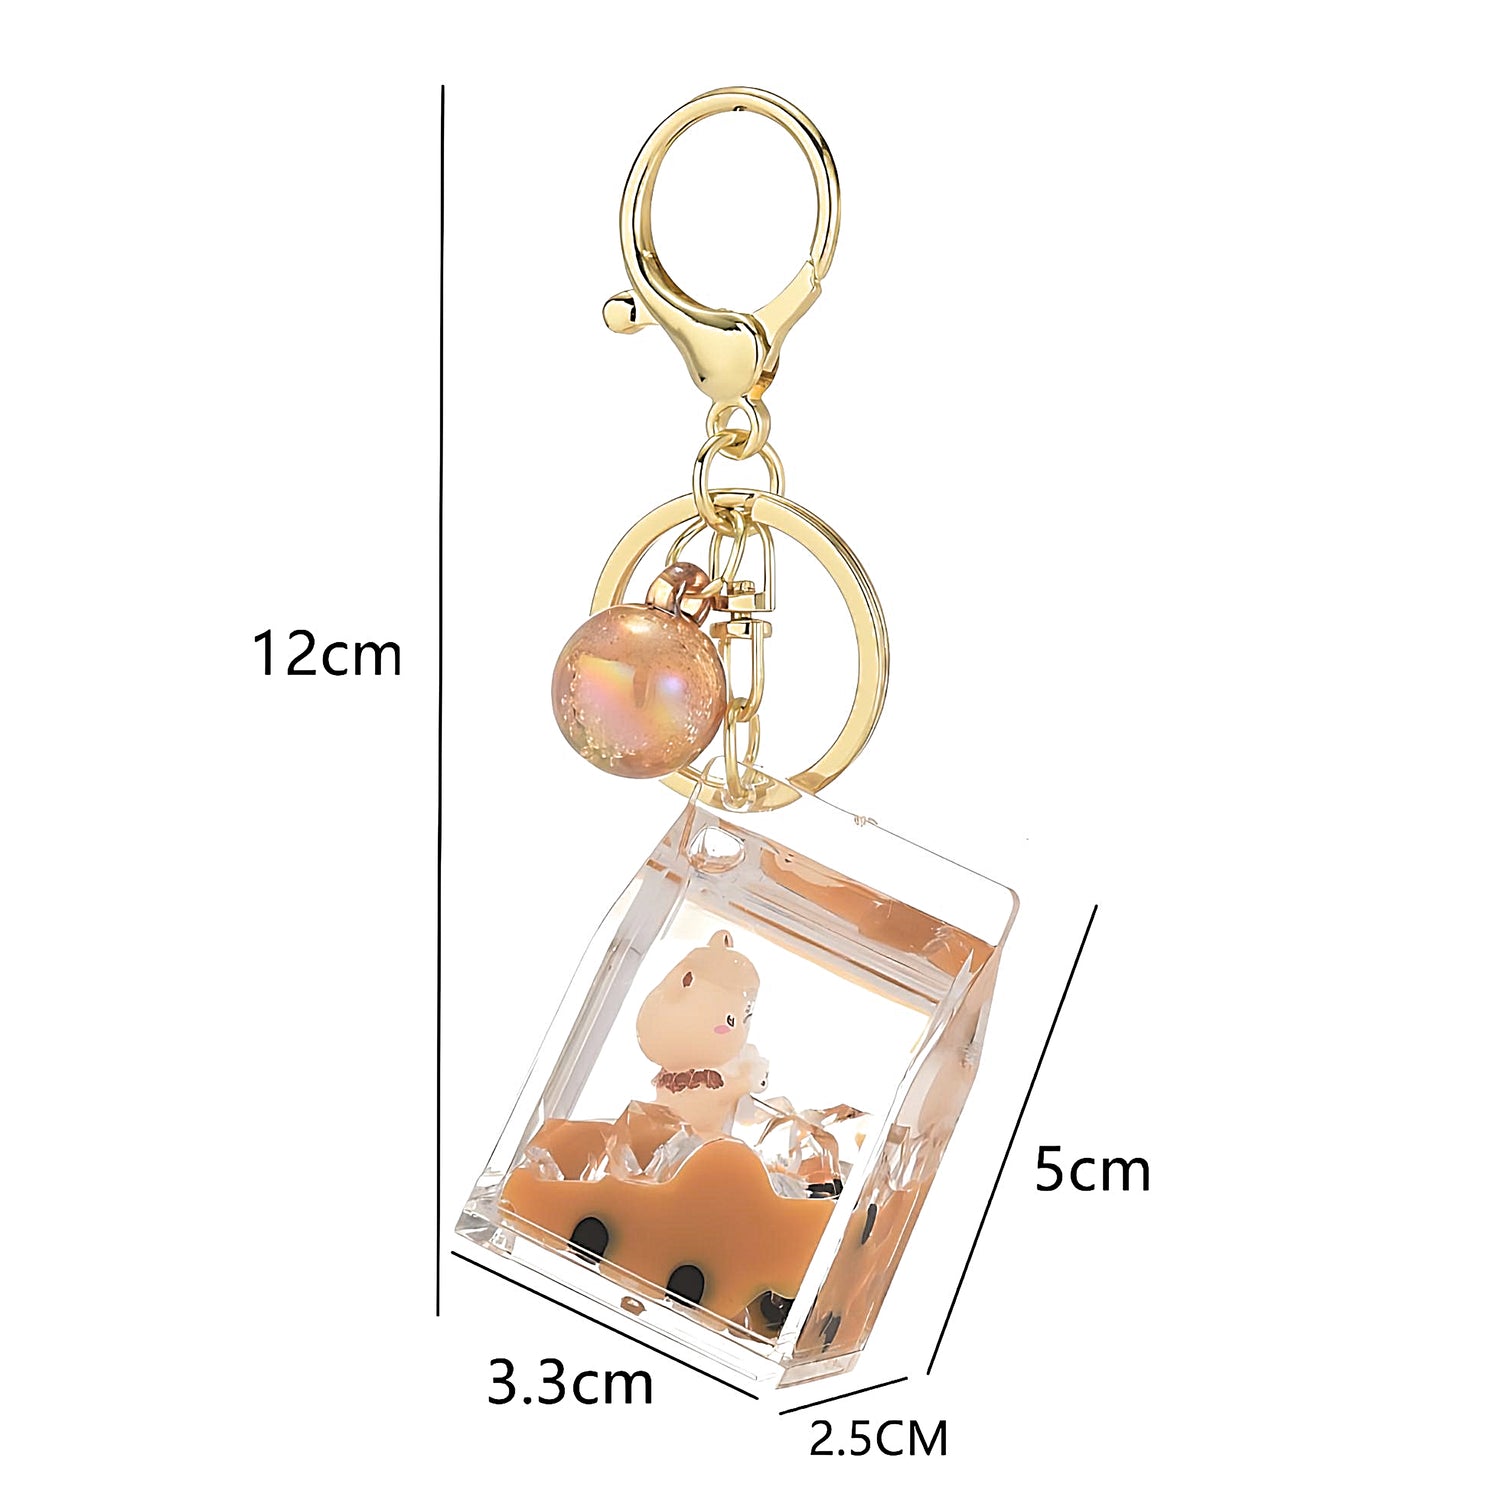 the dimensions of a Bubble Tea keychain, white background